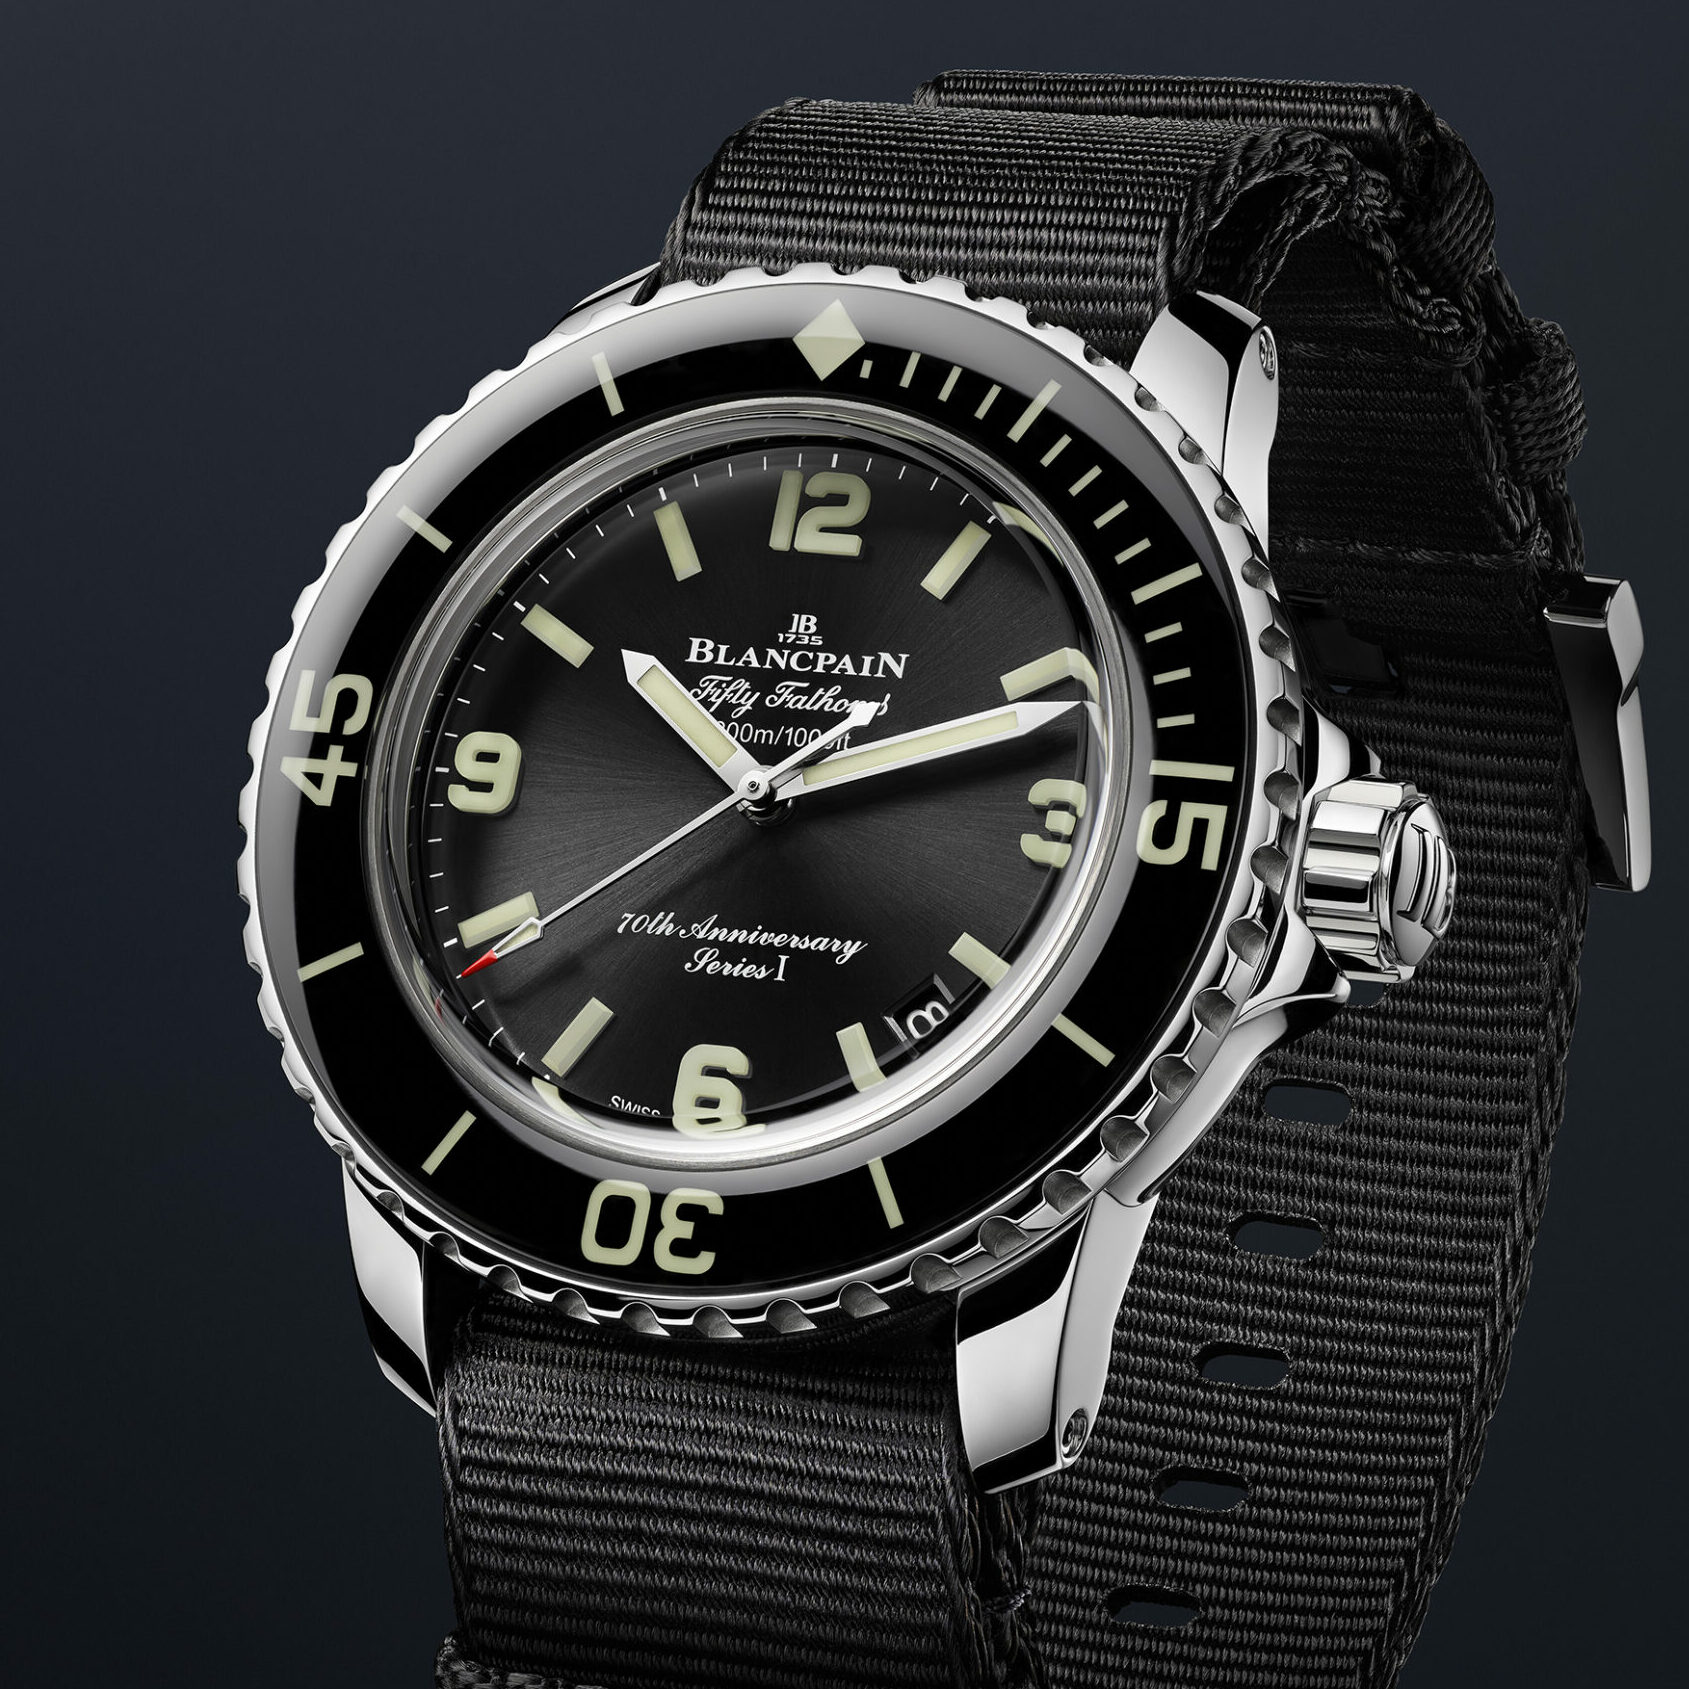 What is so special about the new Blancpain Fifty Fathoms 70th Anniversary Act 1?